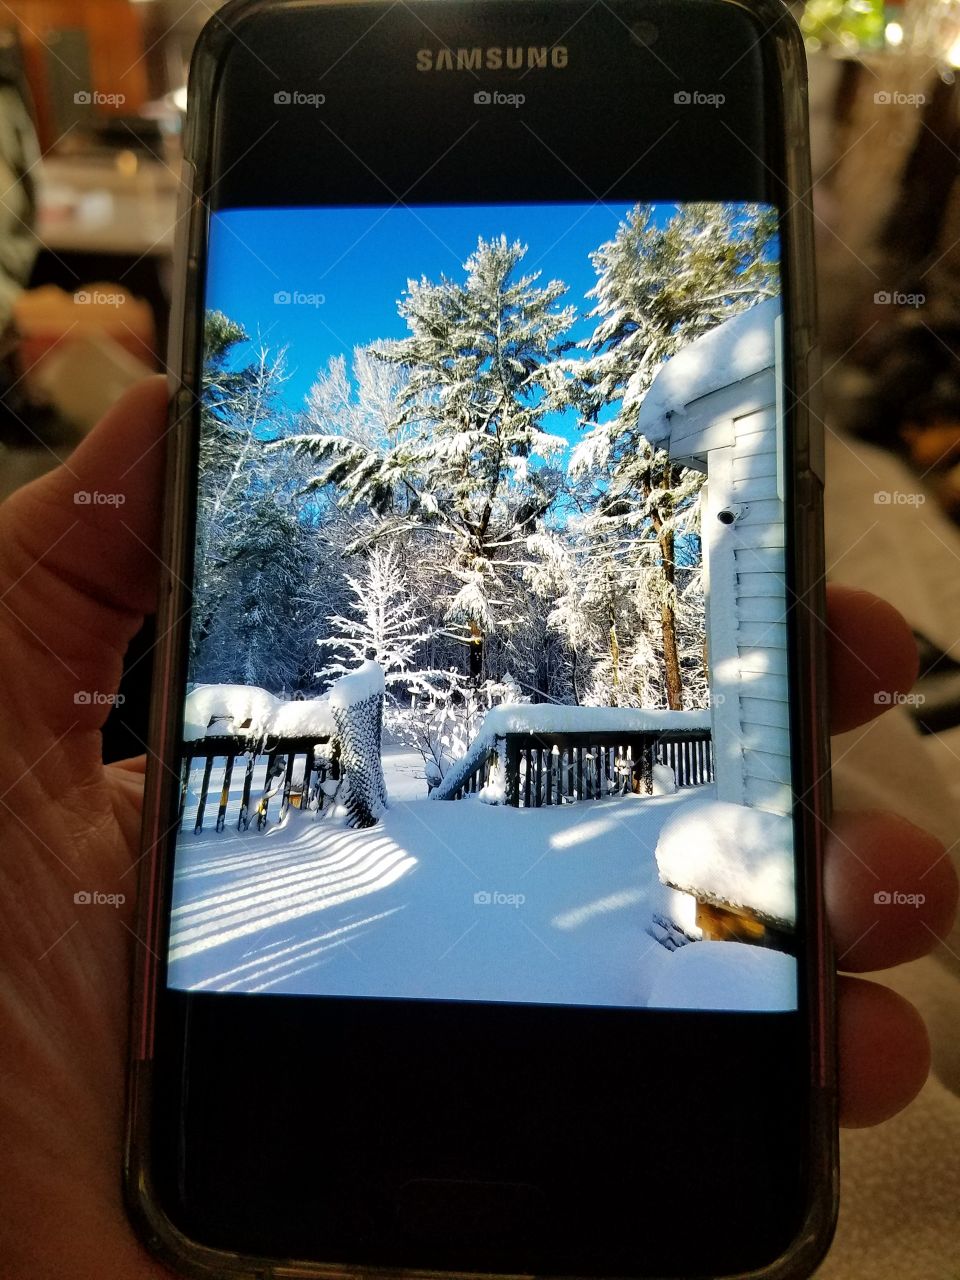 Held Cell phone with photo of a snowstorm scene of deck & woods with trees covered in snow.